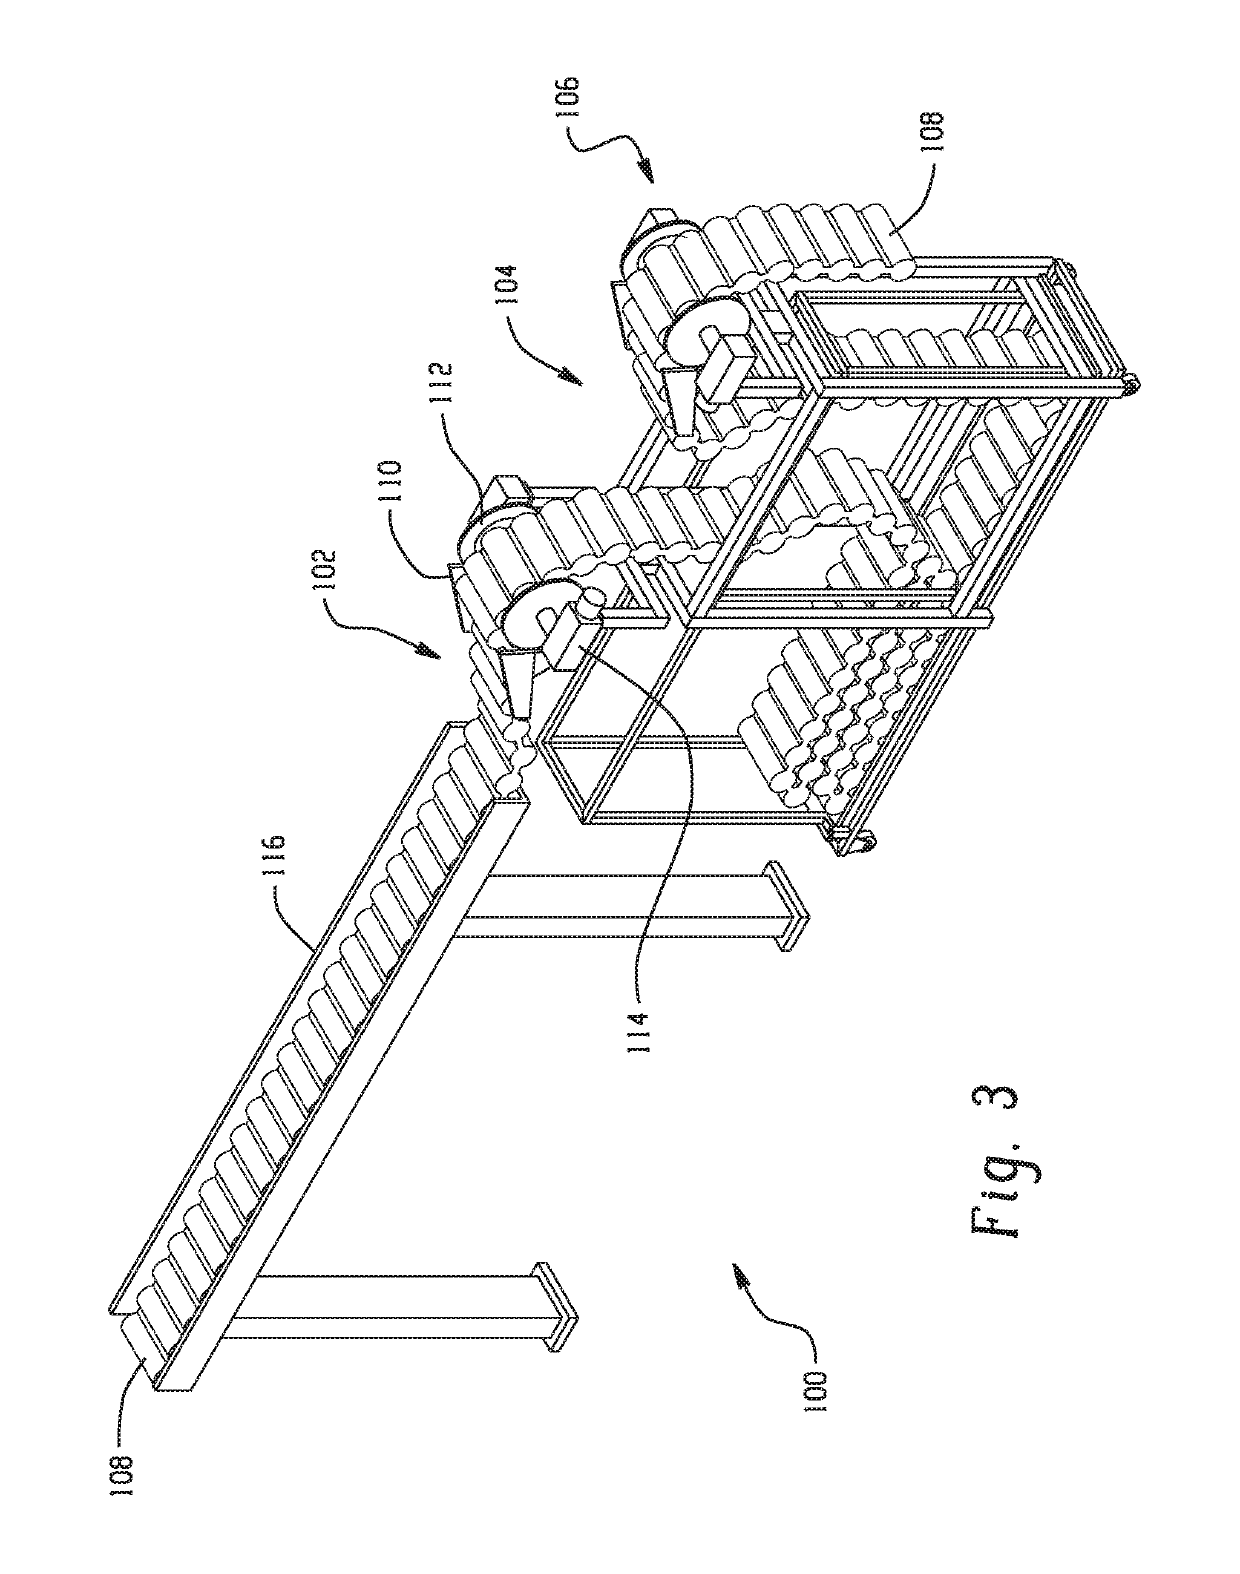 Automated mattress manufacturing process and apparatus